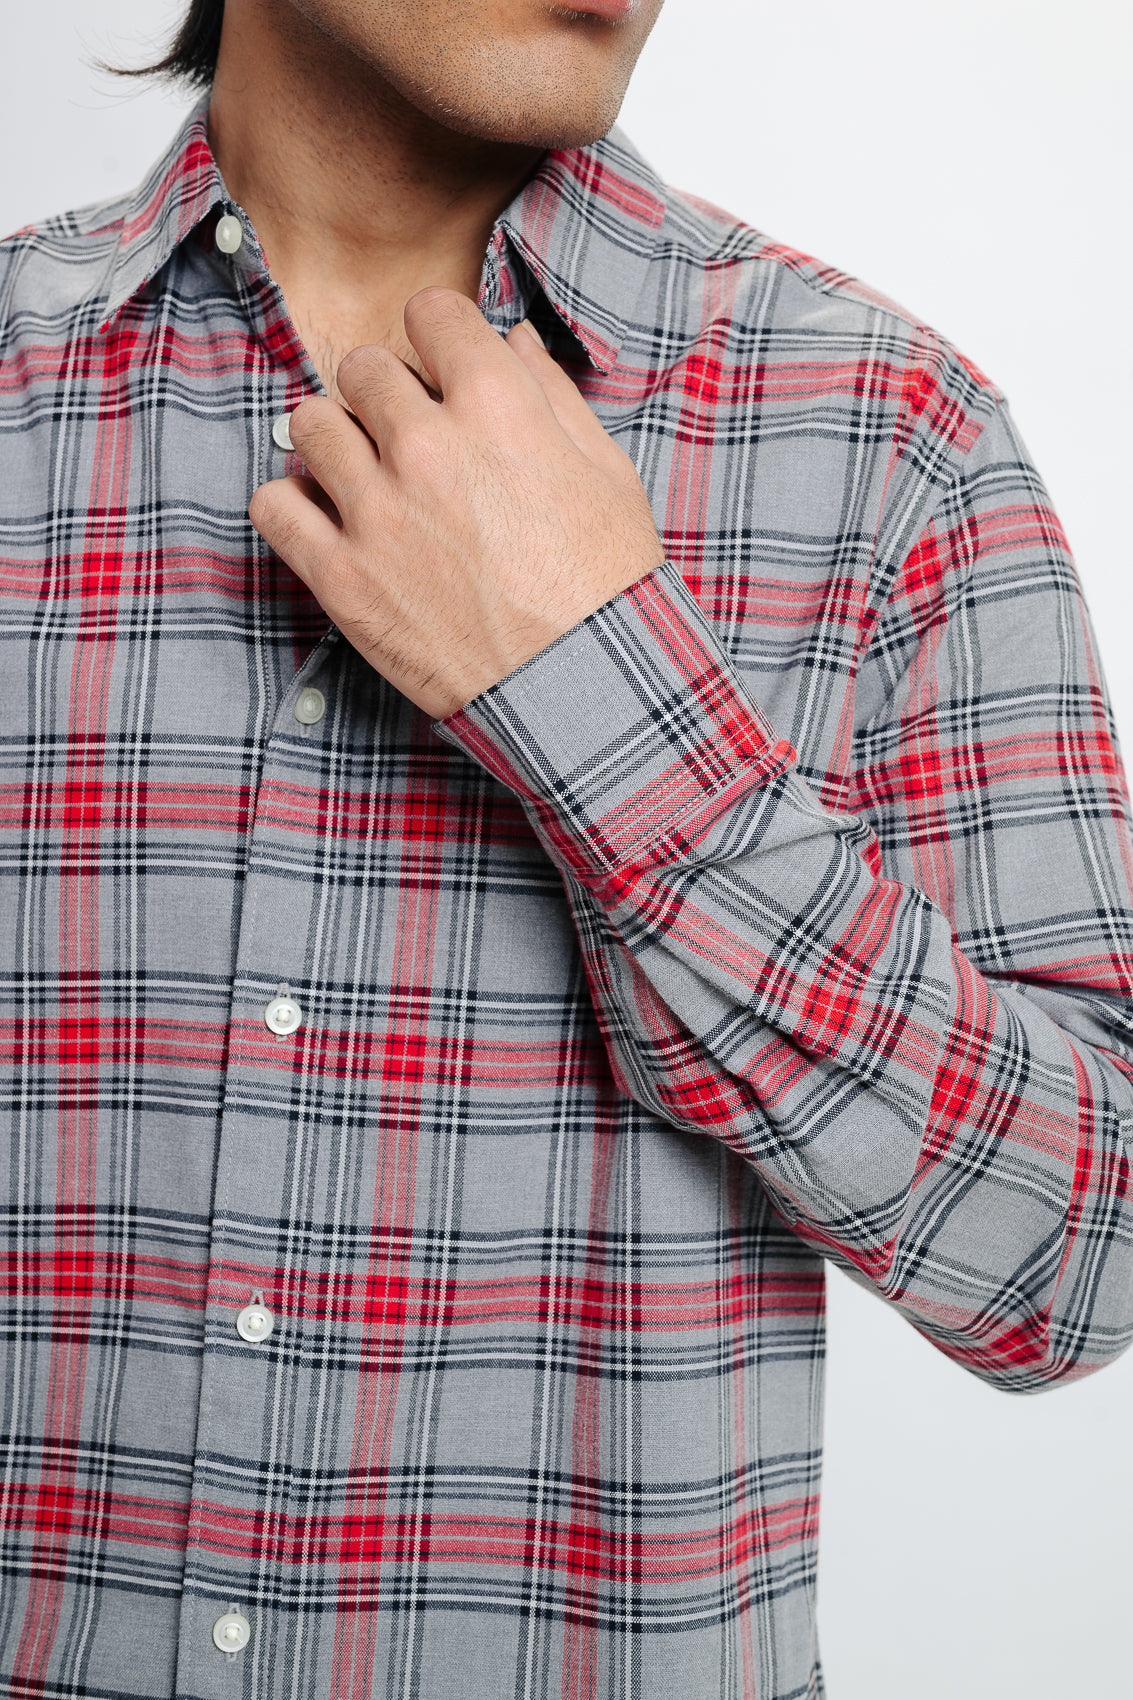 MEN'S RED CHECKED SHIRT